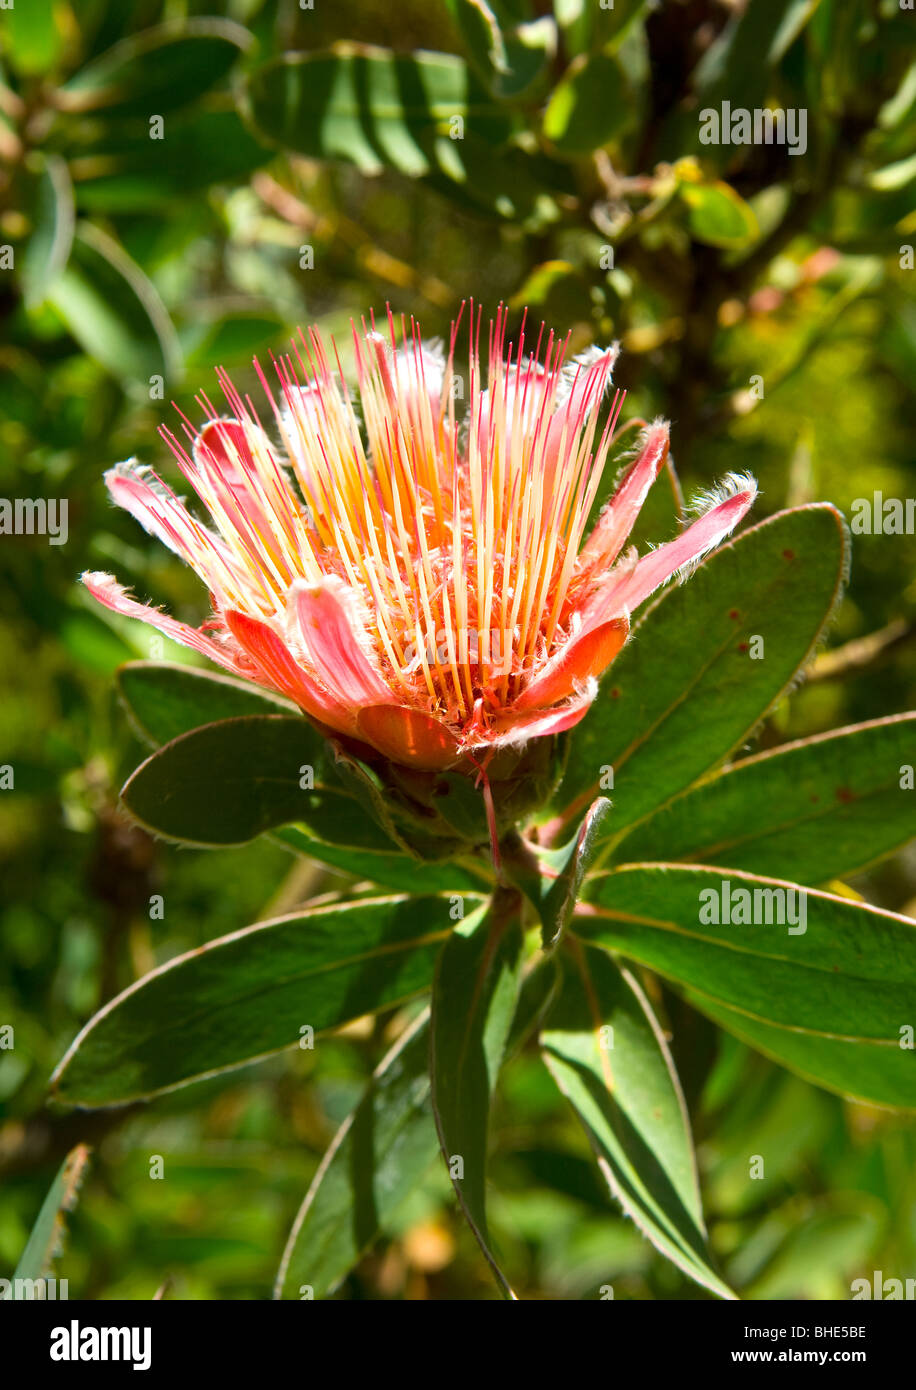 Protea flower of South Africa Stock Photo